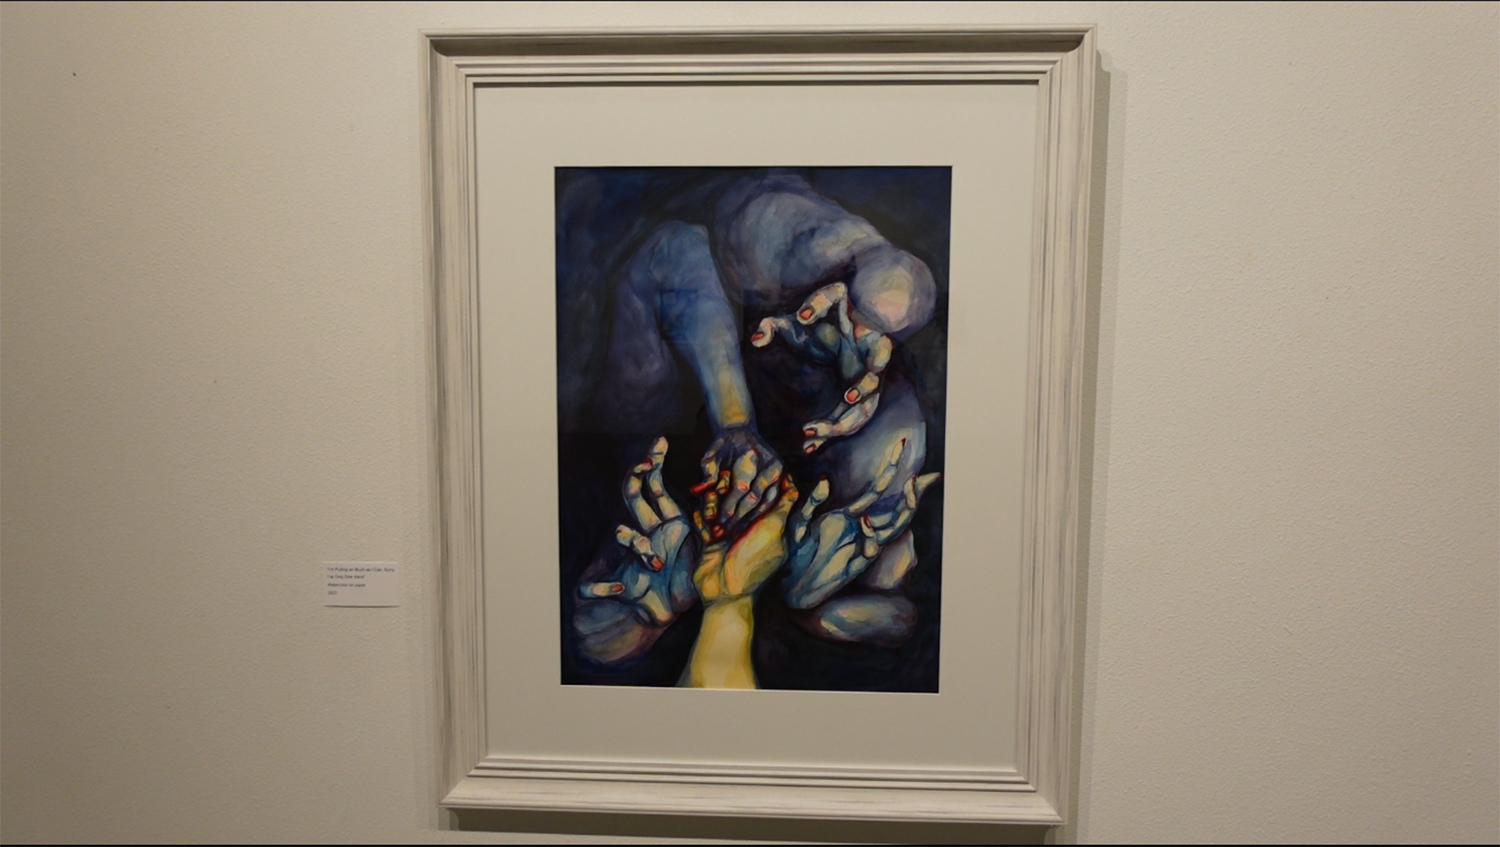 A framed painting hangs on the wall of the UAF Art Gallery during Daniell Stromanthe's BFA exhibition, Painful Yet Tender. image courtesy of the artist